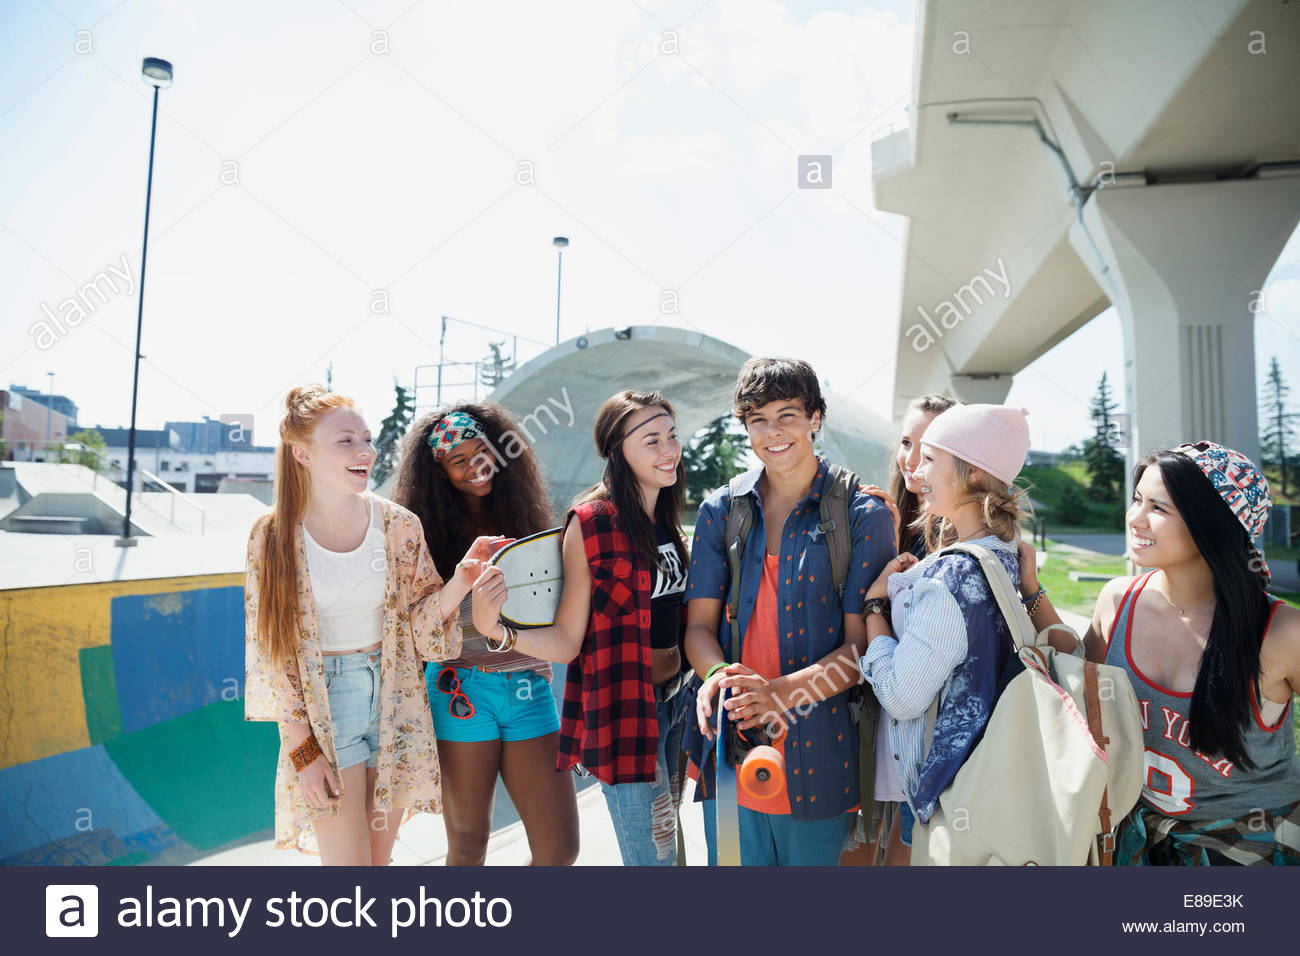 Teenagers hanging out at skateboard park Stock Photo